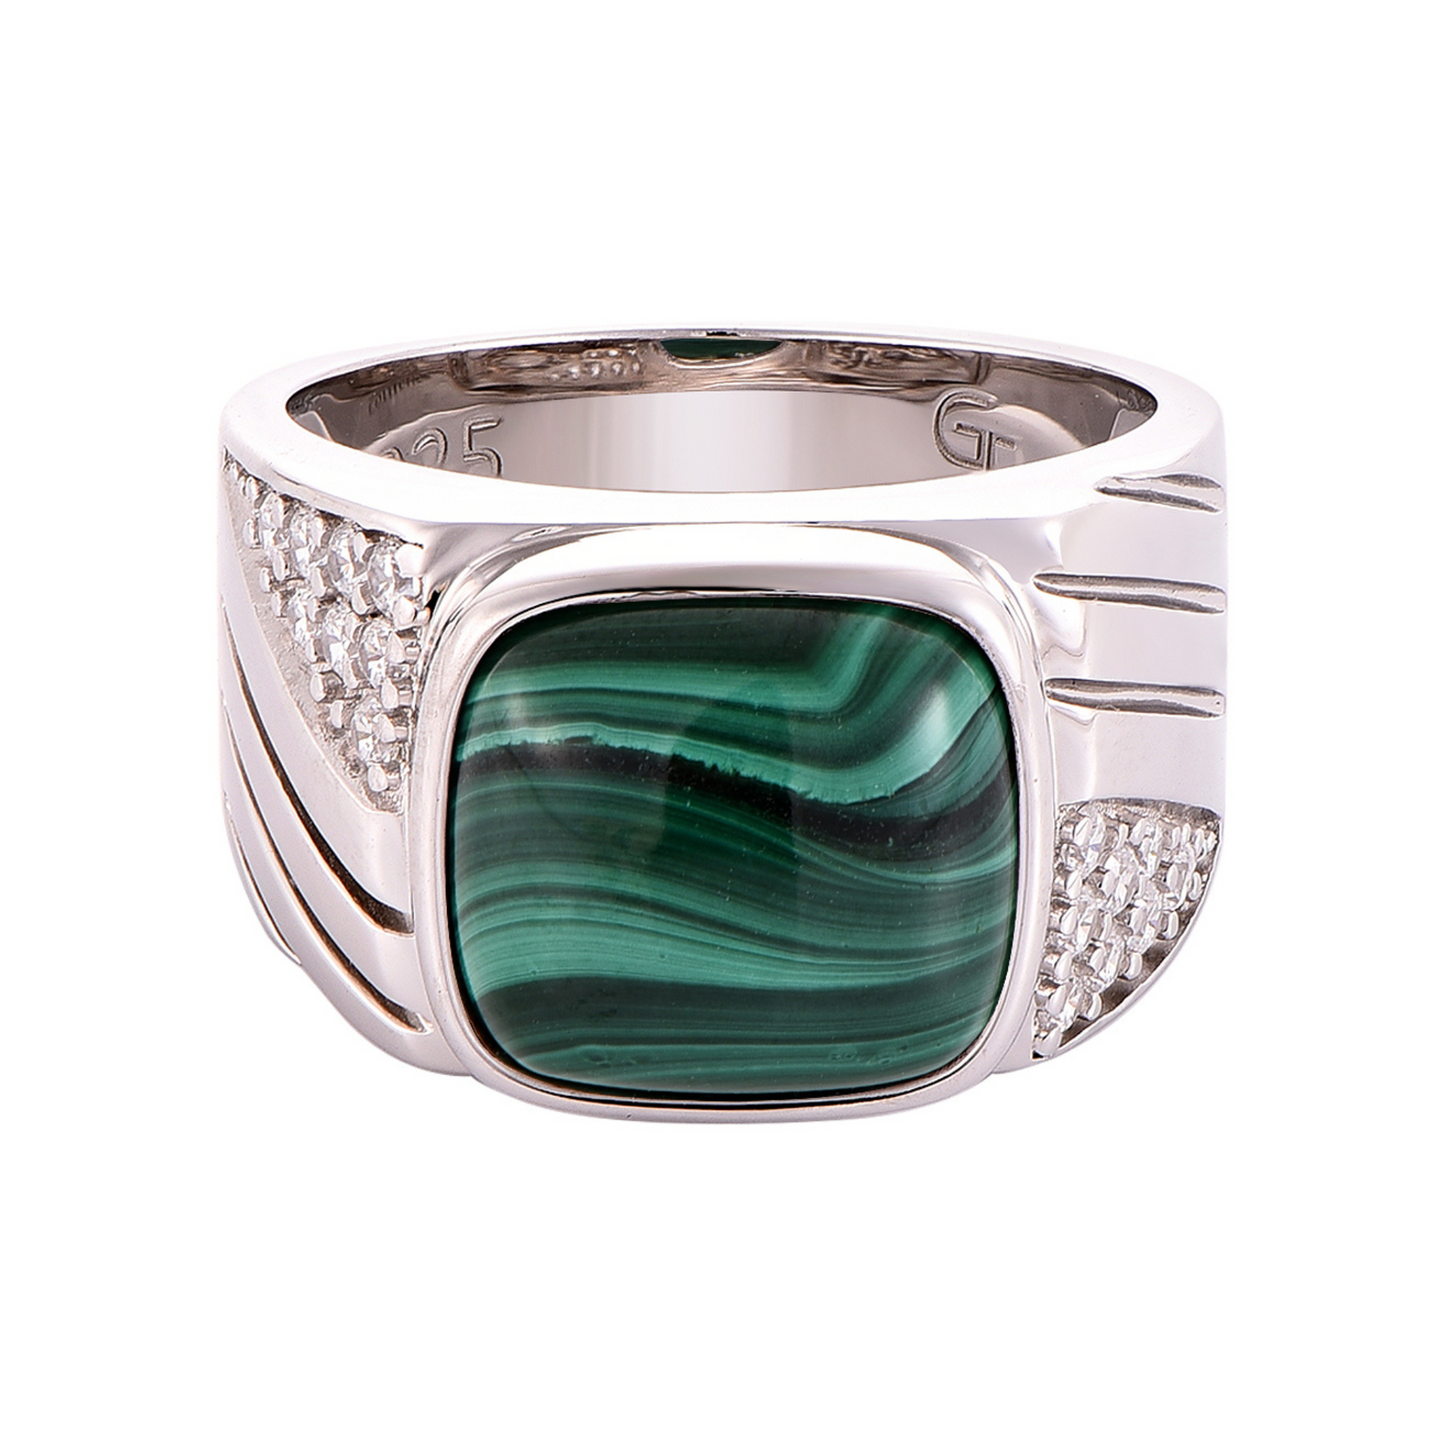 Men's 925 Sterling Silver RING with MALACHITE stone